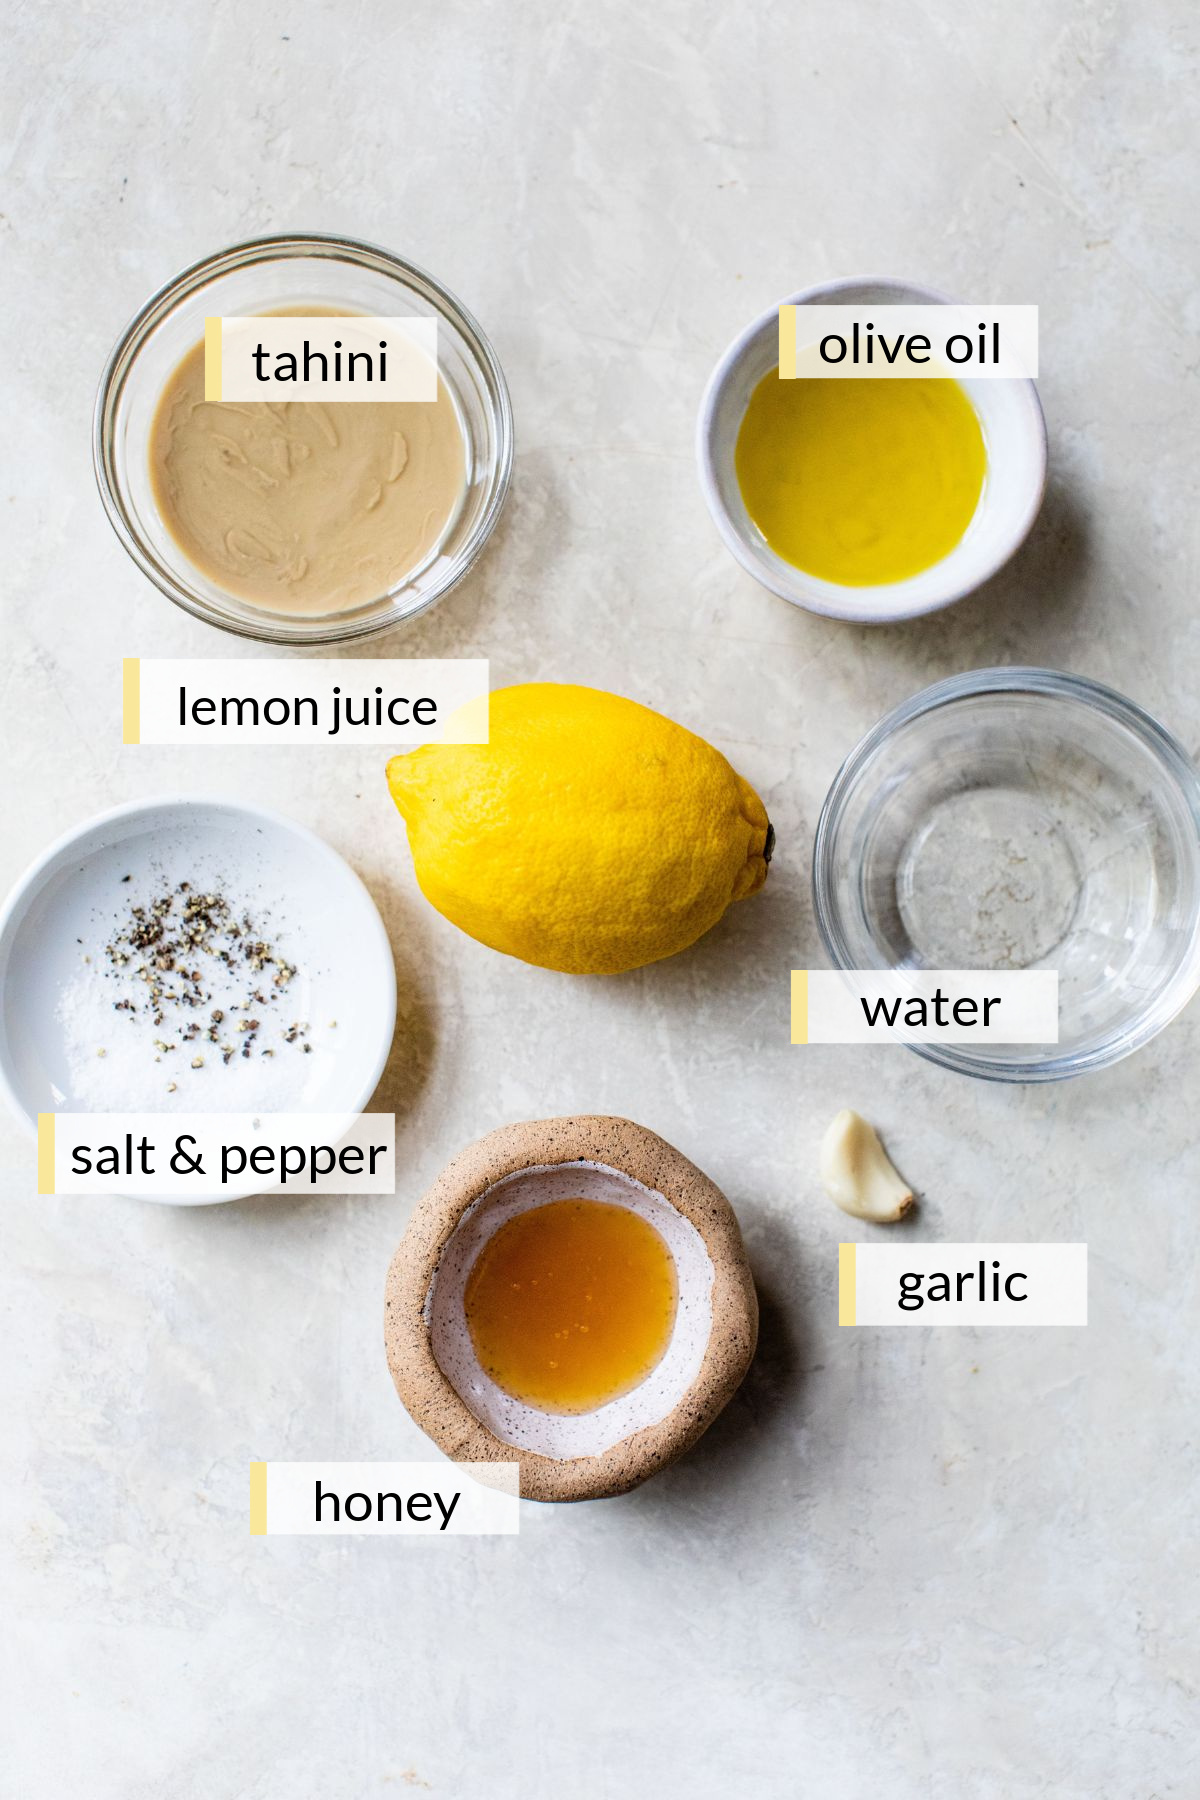 Lemon, tahini, olive oil, honey, garlic and water divided into small portions.